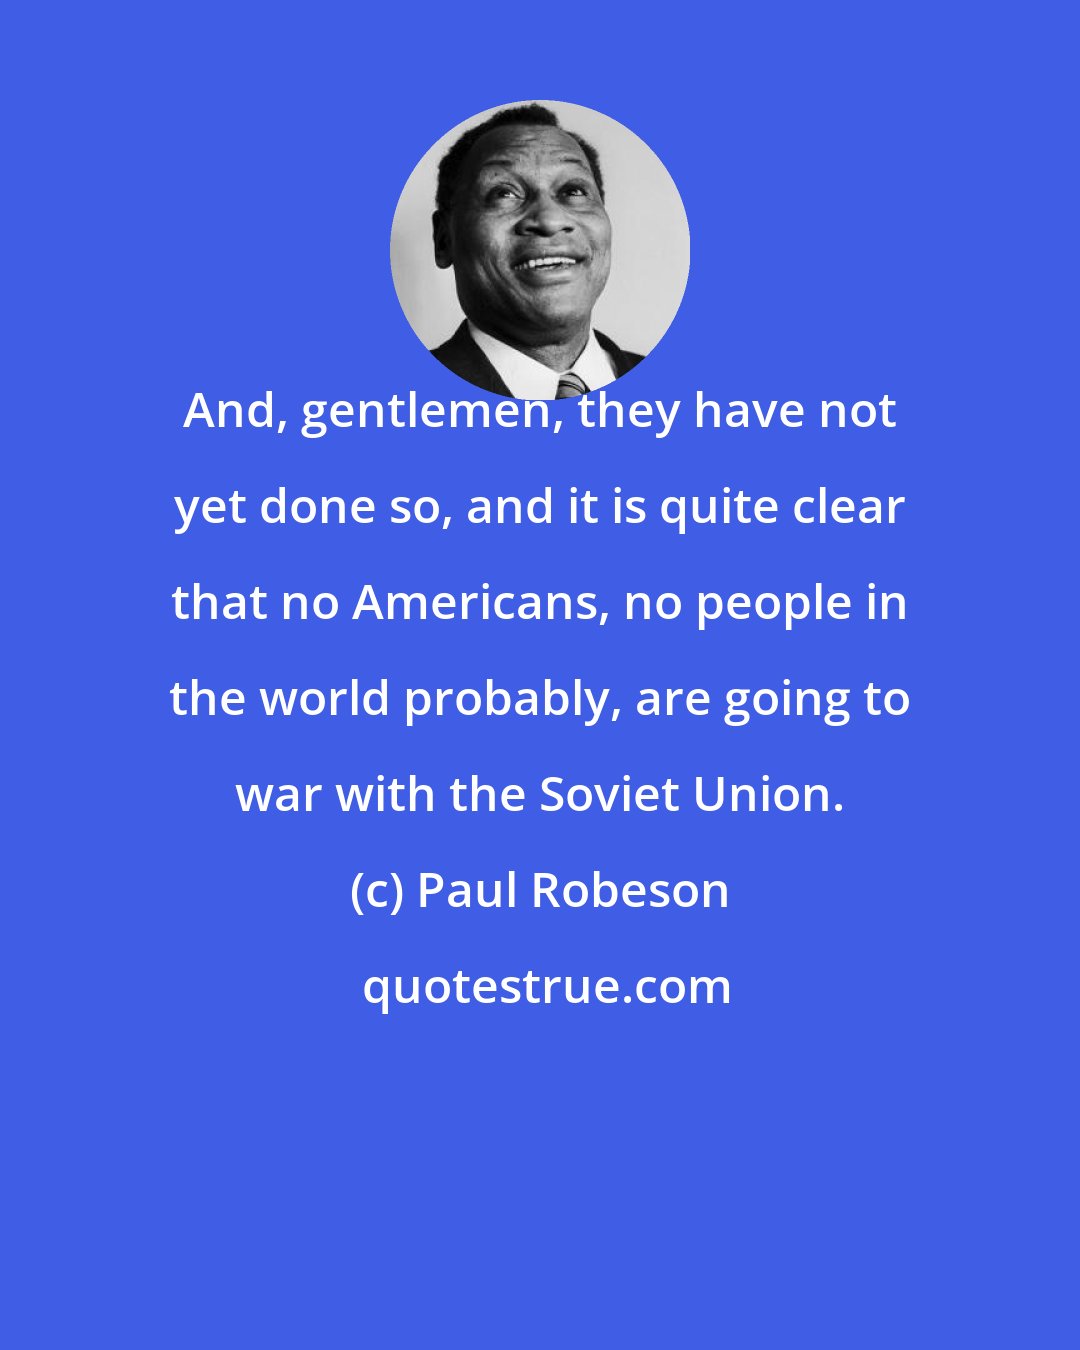 Paul Robeson: And, gentlemen, they have not yet done so, and it is quite clear that no Americans, no people in the world probably, are going to war with the Soviet Union.